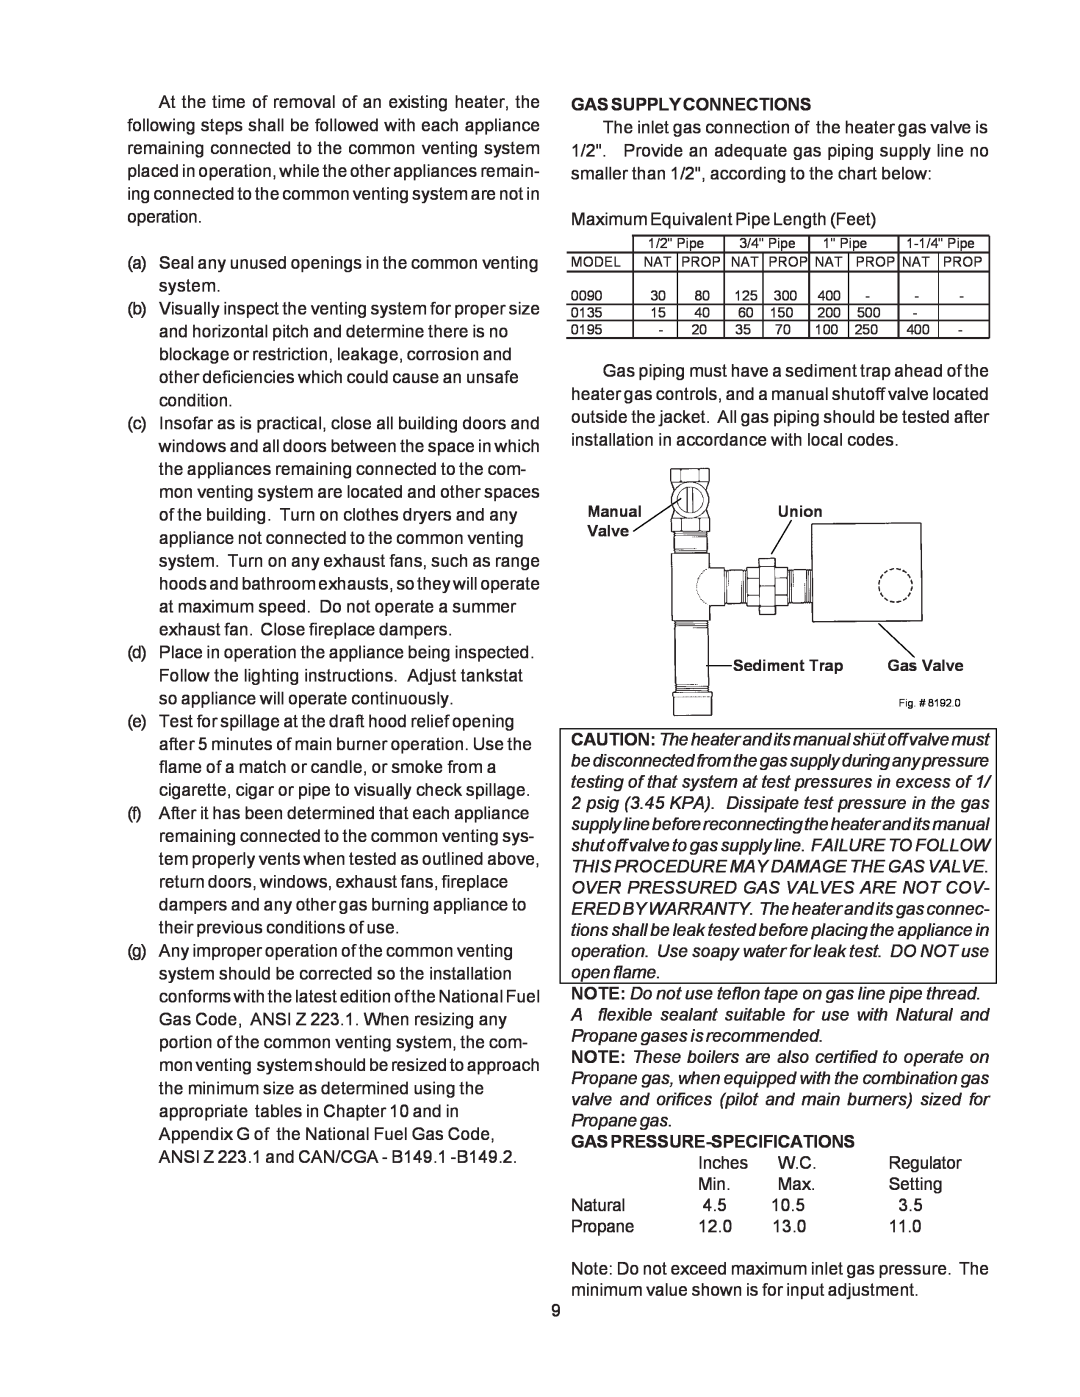 Raypak 195A, 135A, 090A manual Gas Supply Connections, Gaspressure-Specifications 